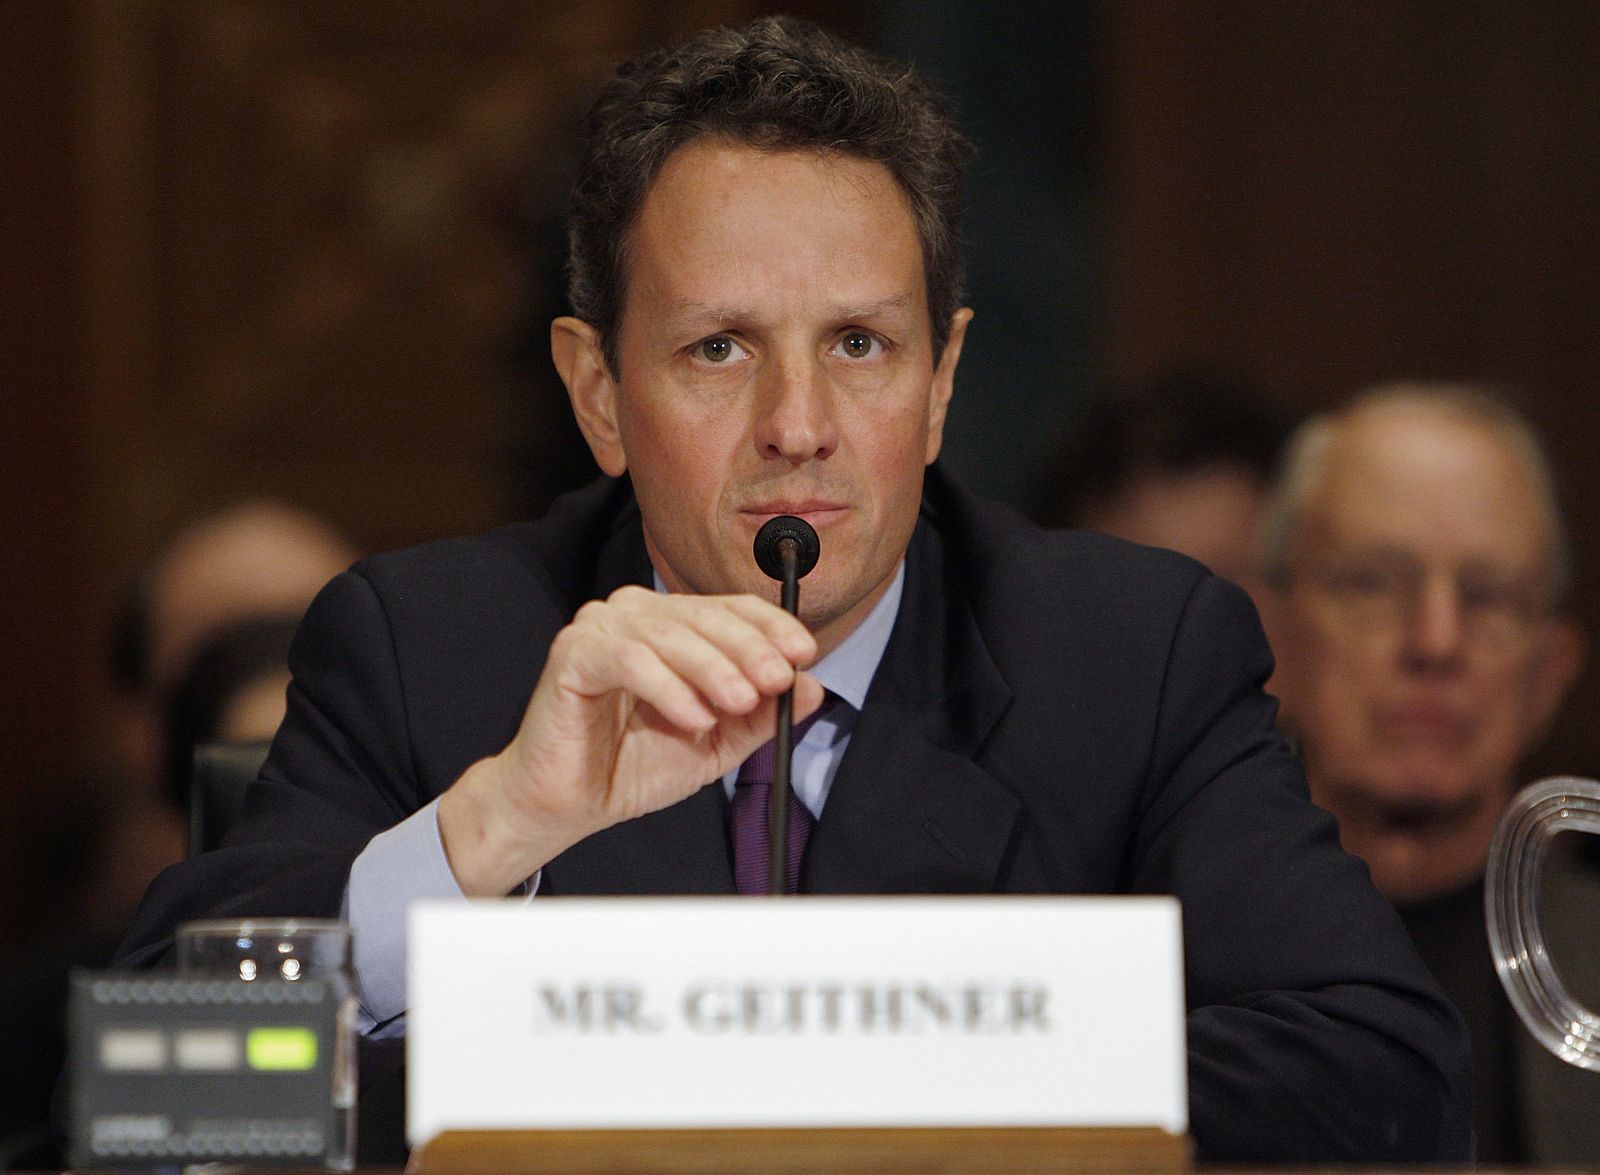 Geithner adjusts his microphone during his confirmation hearing before the Senate Finance Committee on Capitol Hill in Washington